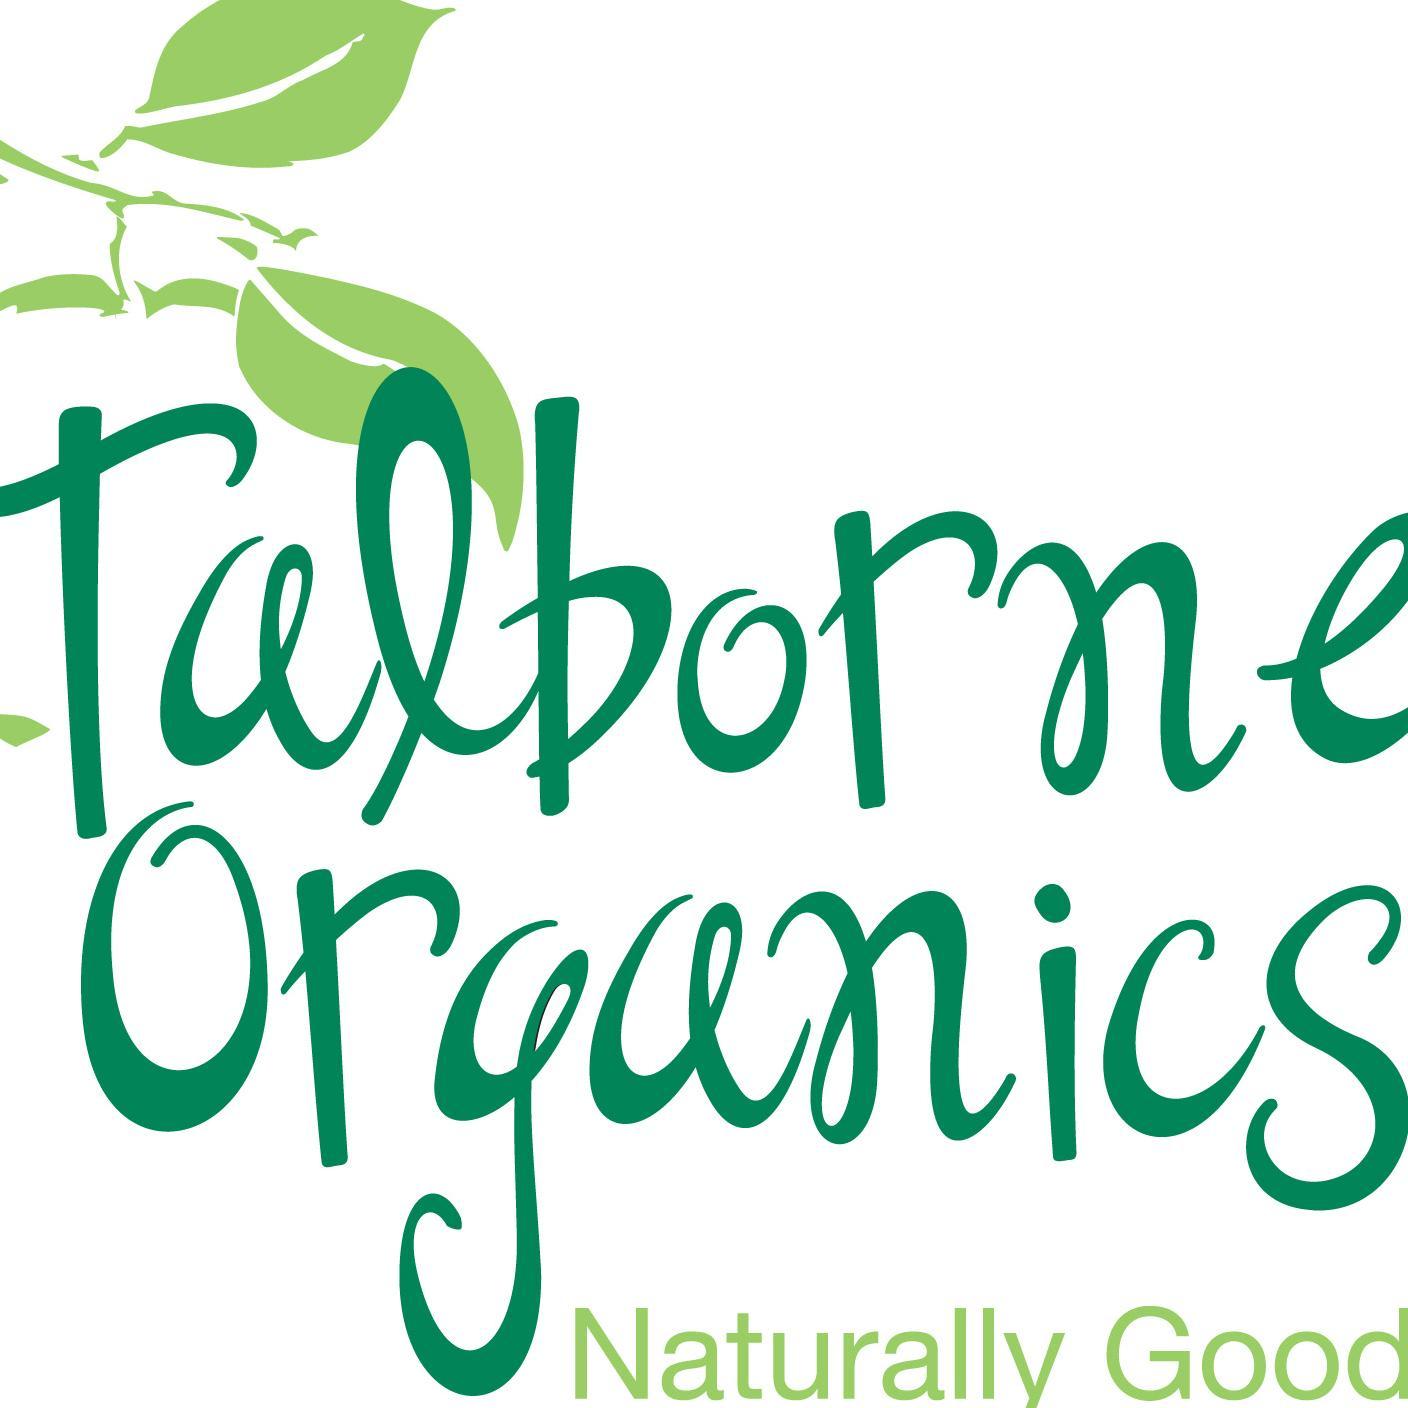 Talborne Organics manufacturers and distributes a range of Certified Organic Fertilizers. 
HEALTHY SOIL = HEALTHY PLANTS = HEALTHY PEOPLE.